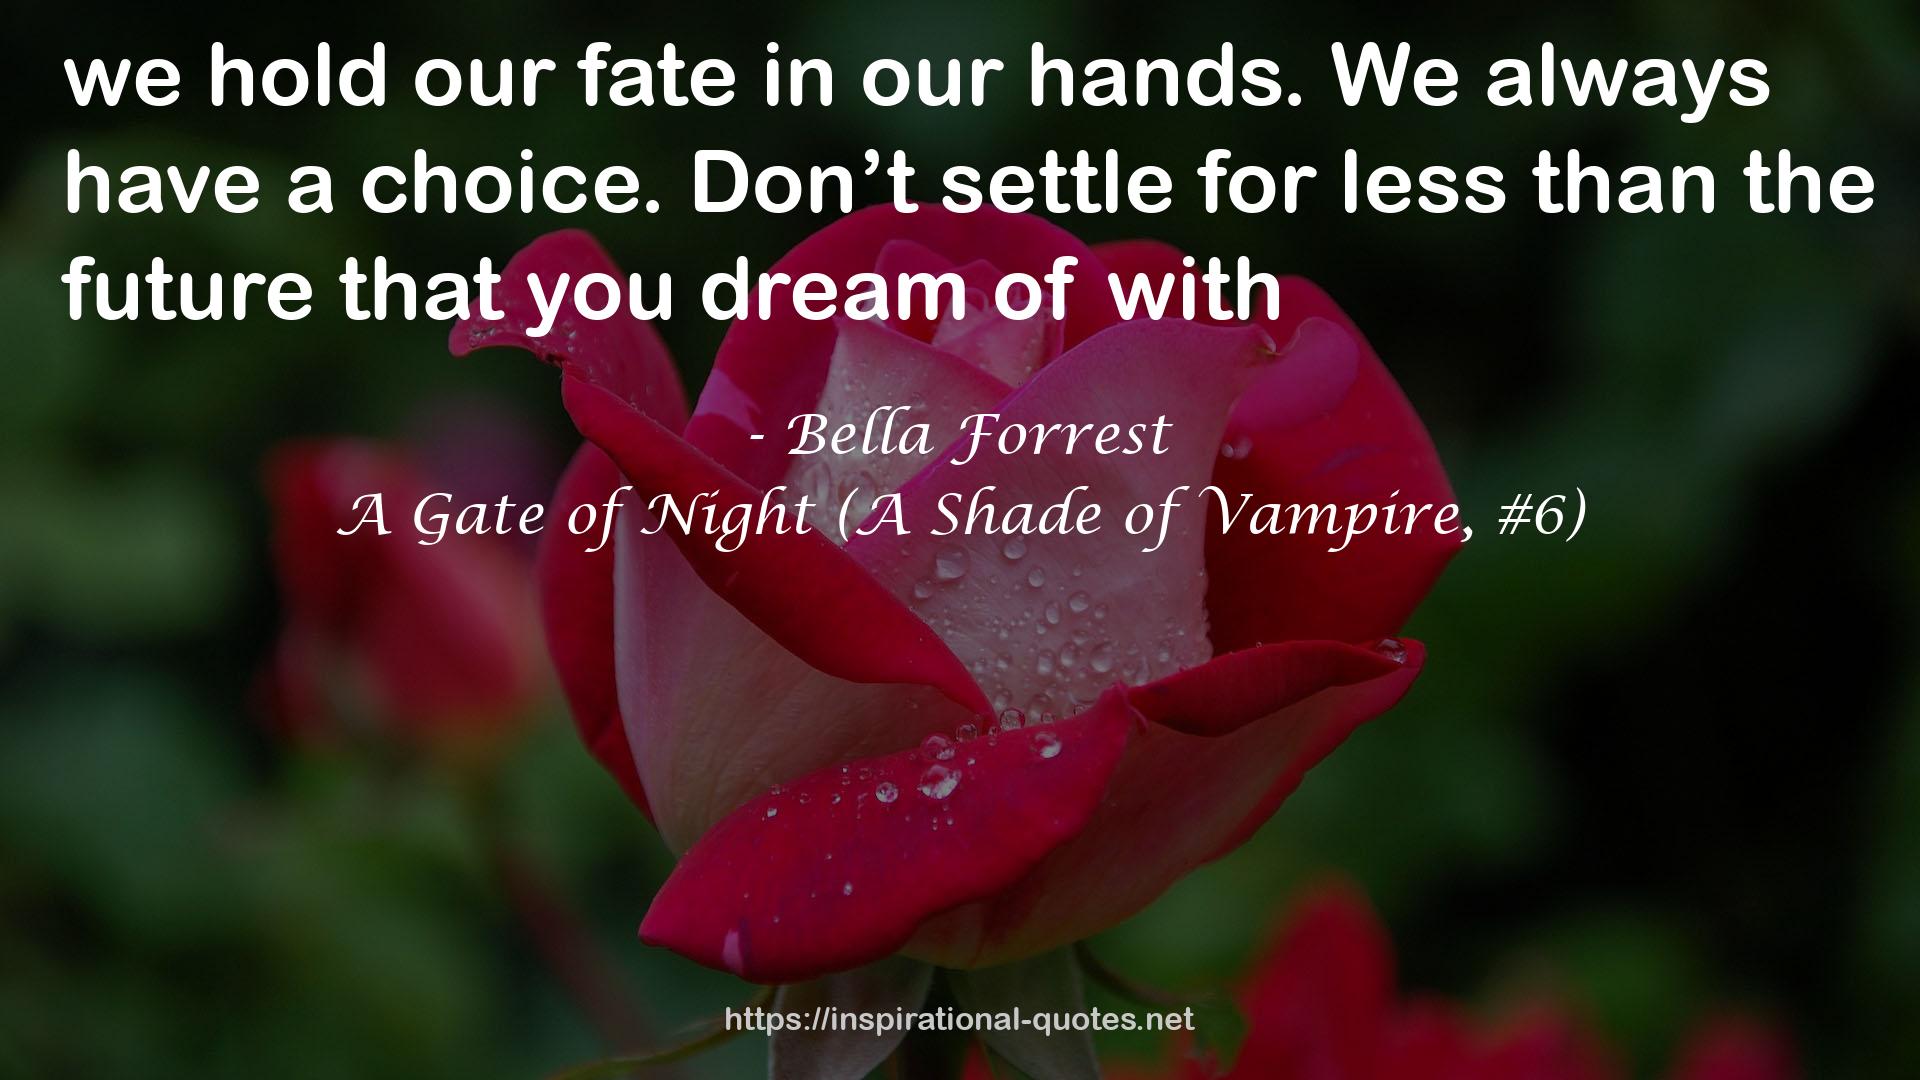 A Gate of Night (A Shade of Vampire, #6) QUOTES